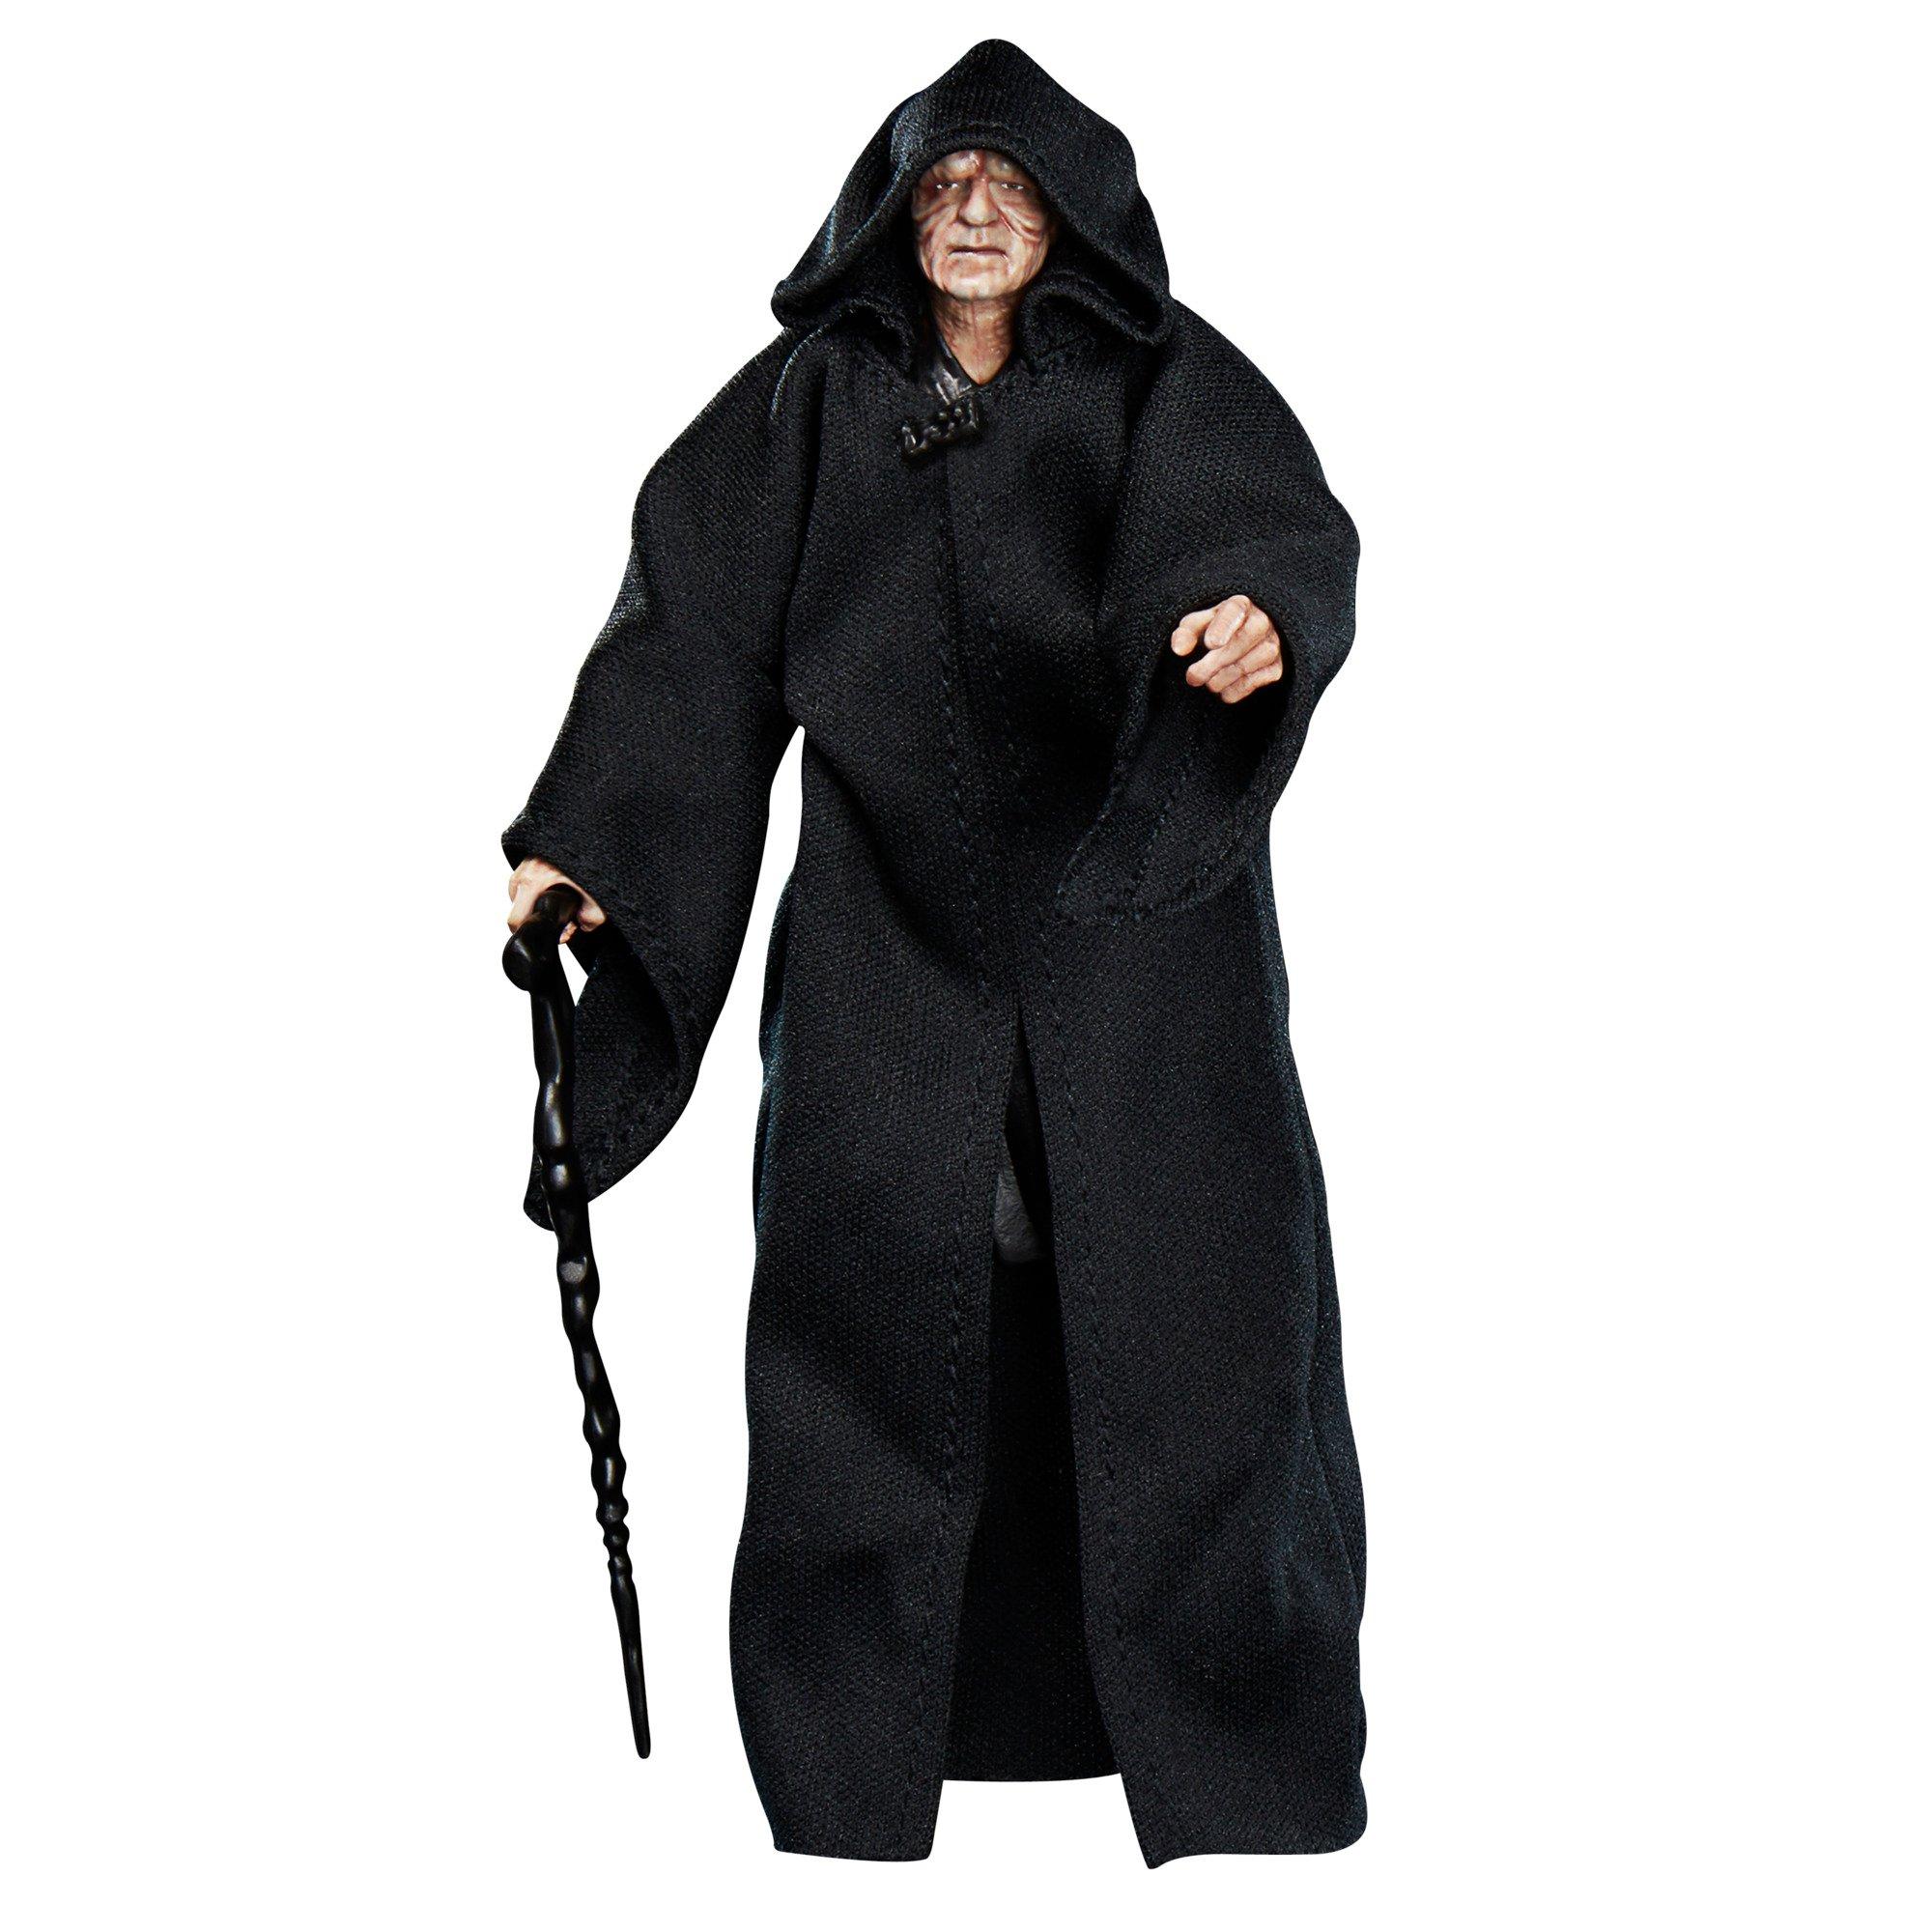 The Emperor Star Wars The Black Series